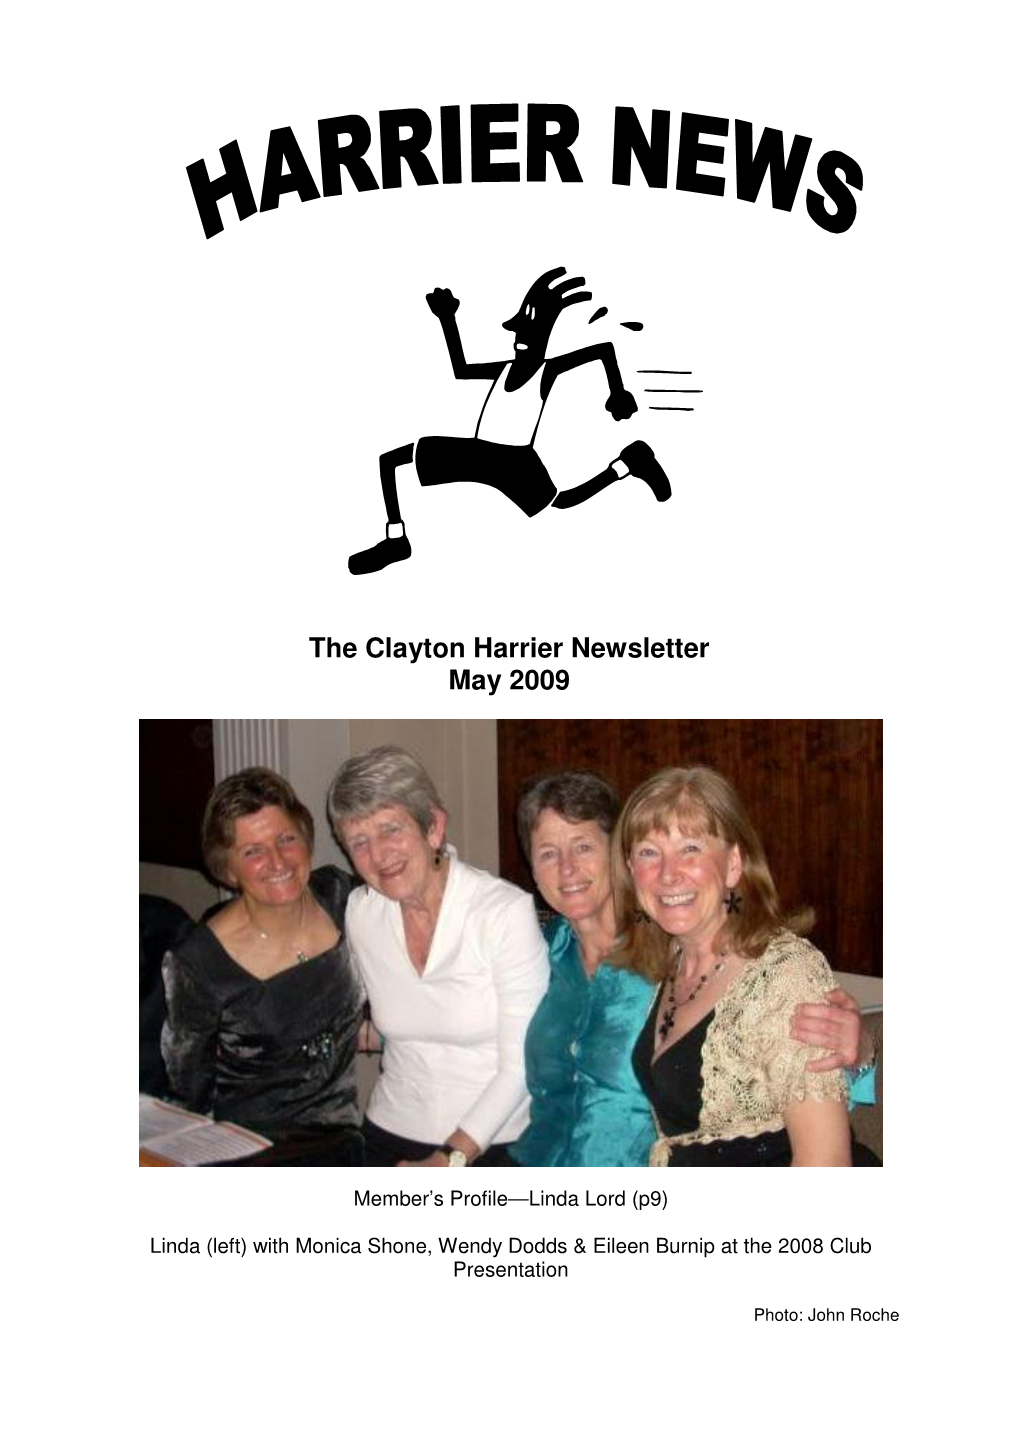 The Clayton Harrier Newsletter May 2009